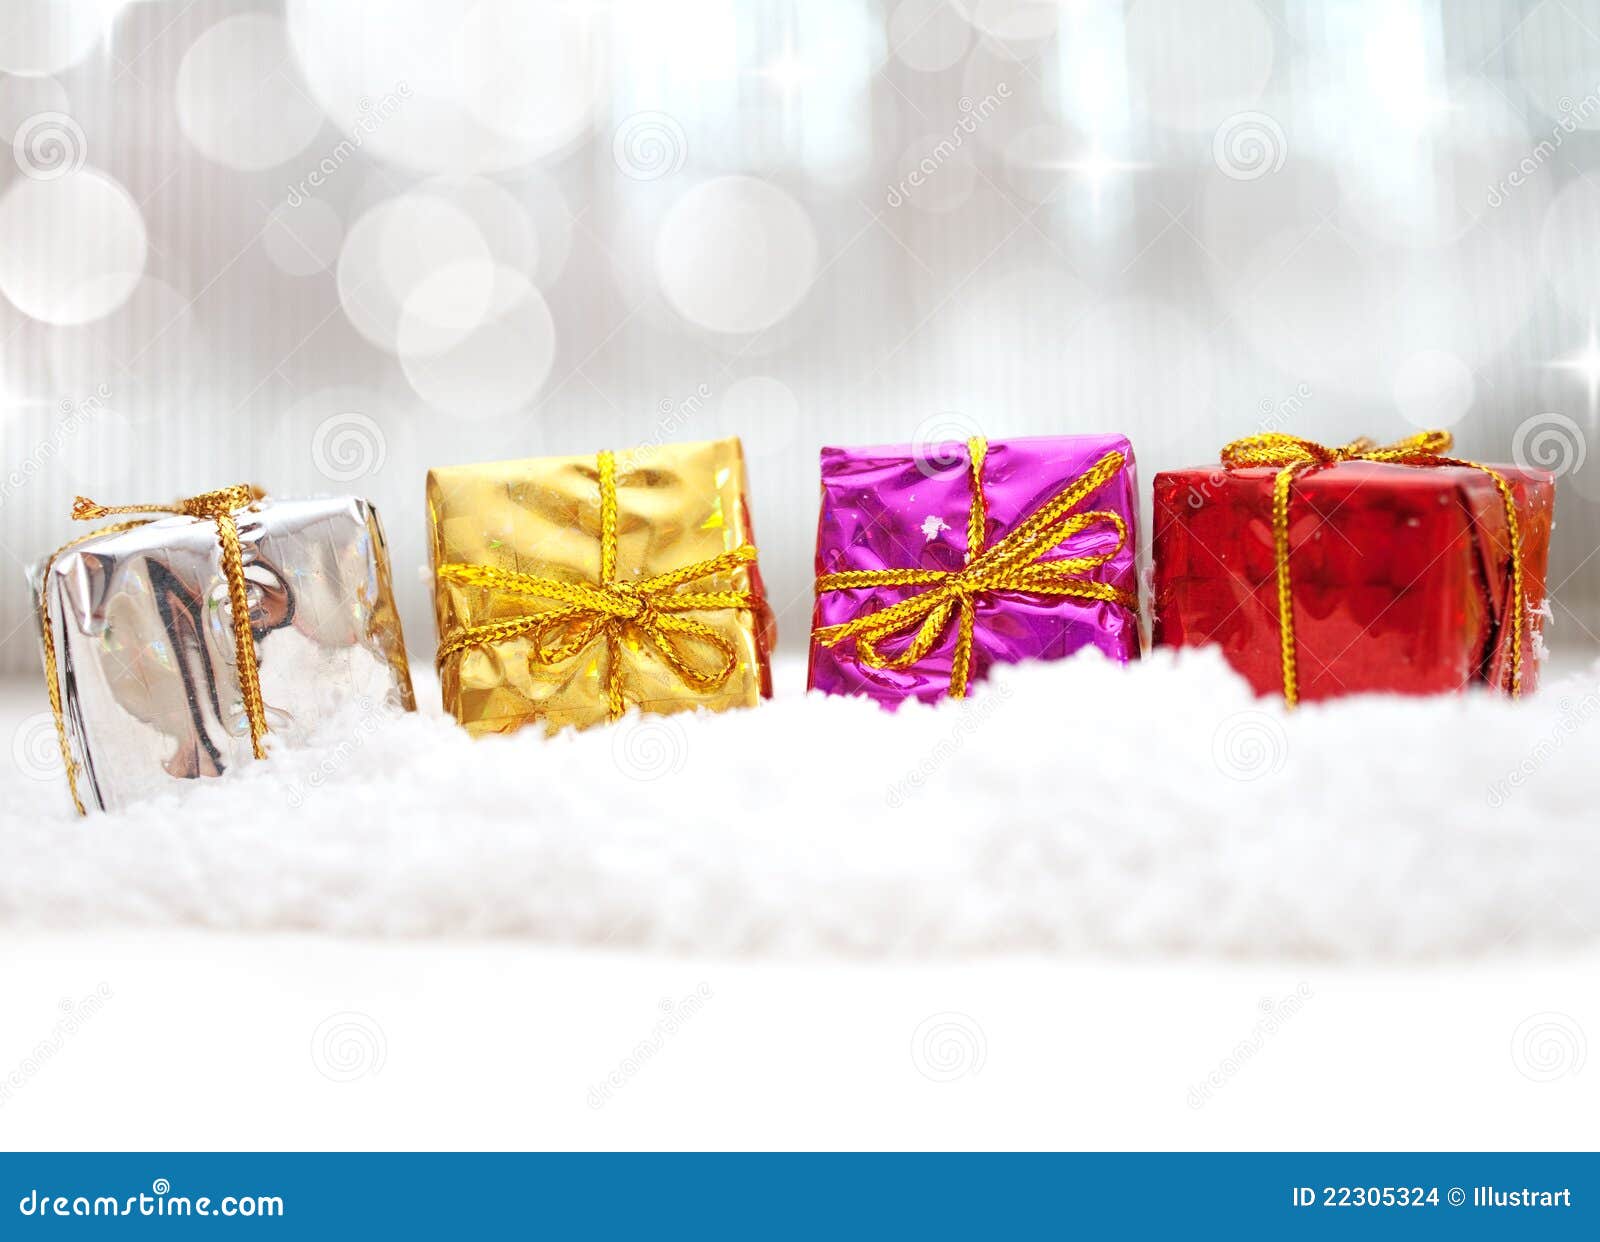 Colorful Christmas Gifts in Snow Stock Photo - Image of decor, light ...